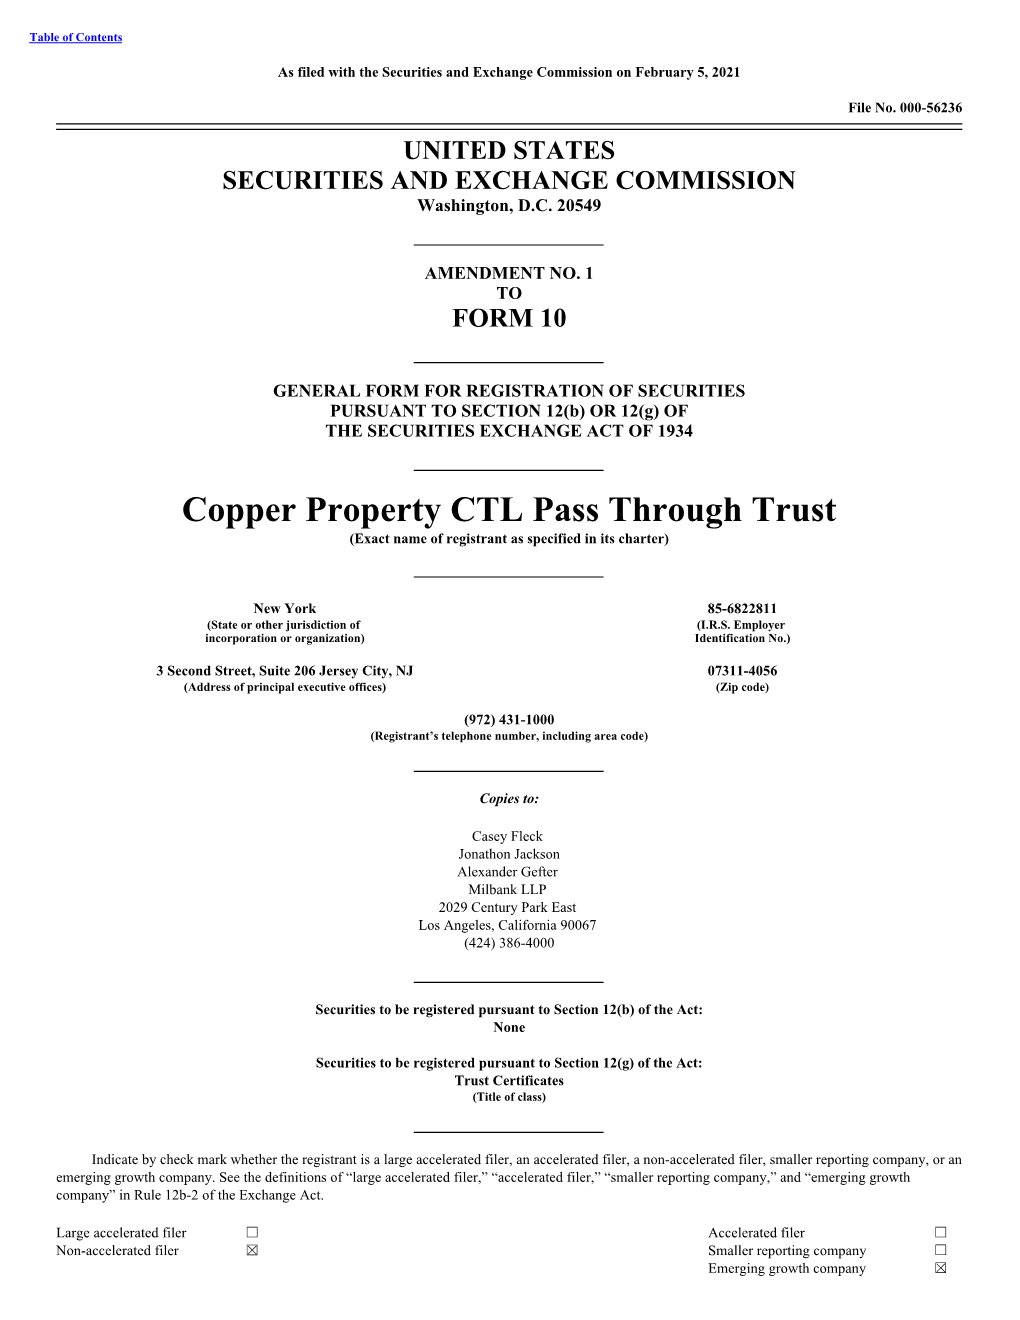 Copper Property CTL Pass Through Trust (Exact Name of Registrant As Specified in Its Charter)